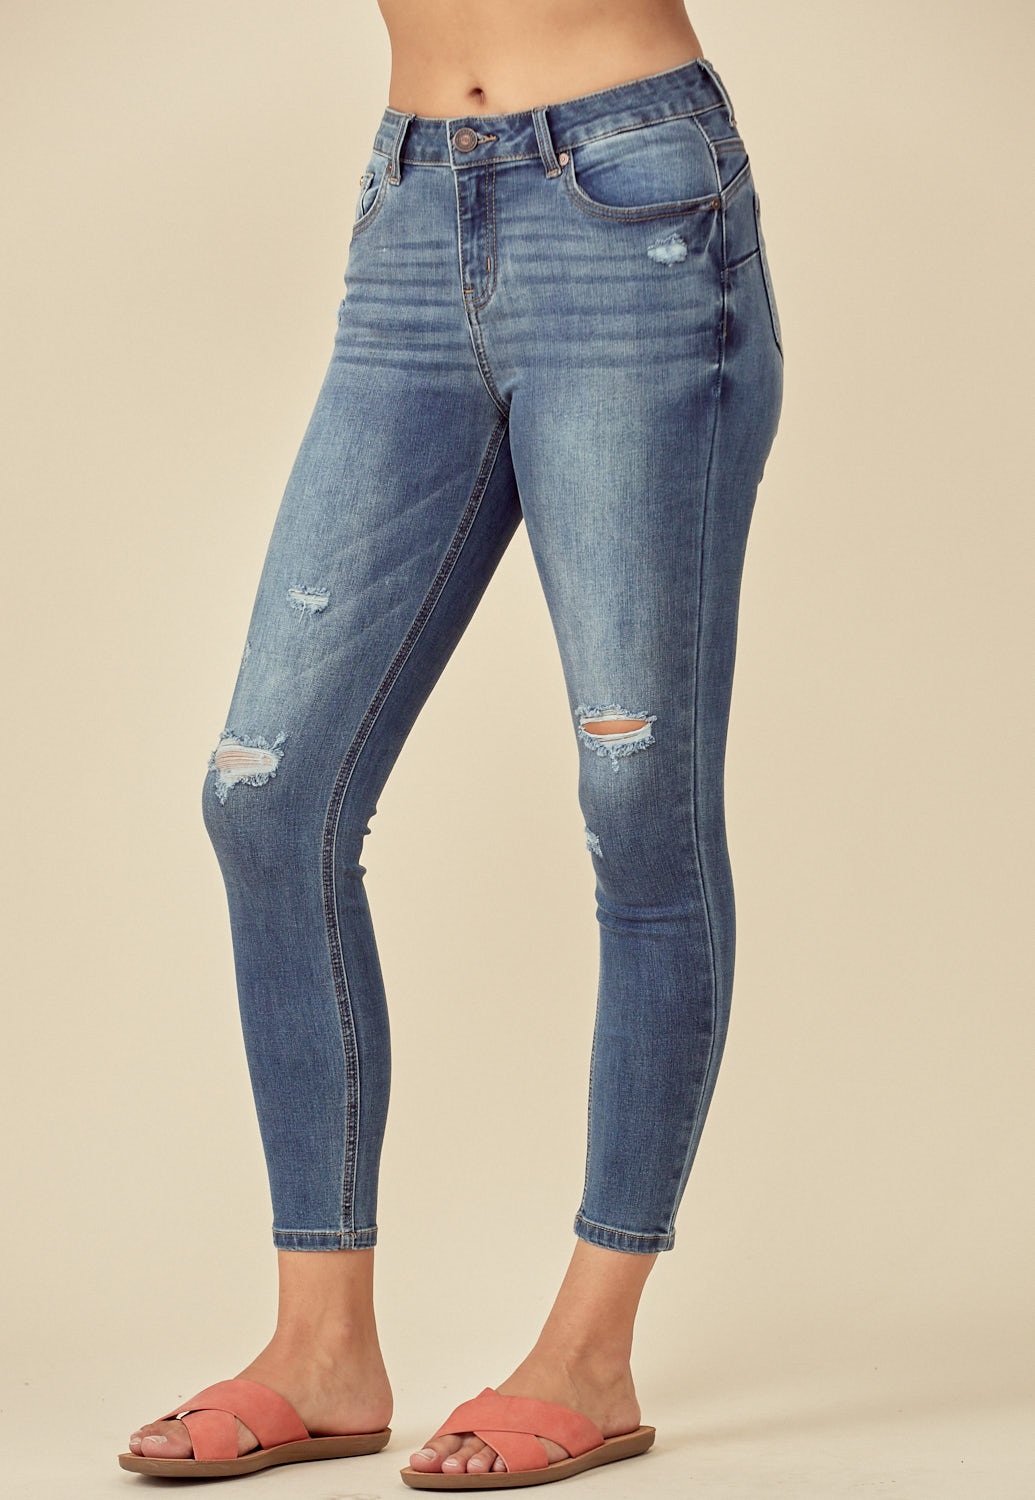 Ankle Length Jeans 